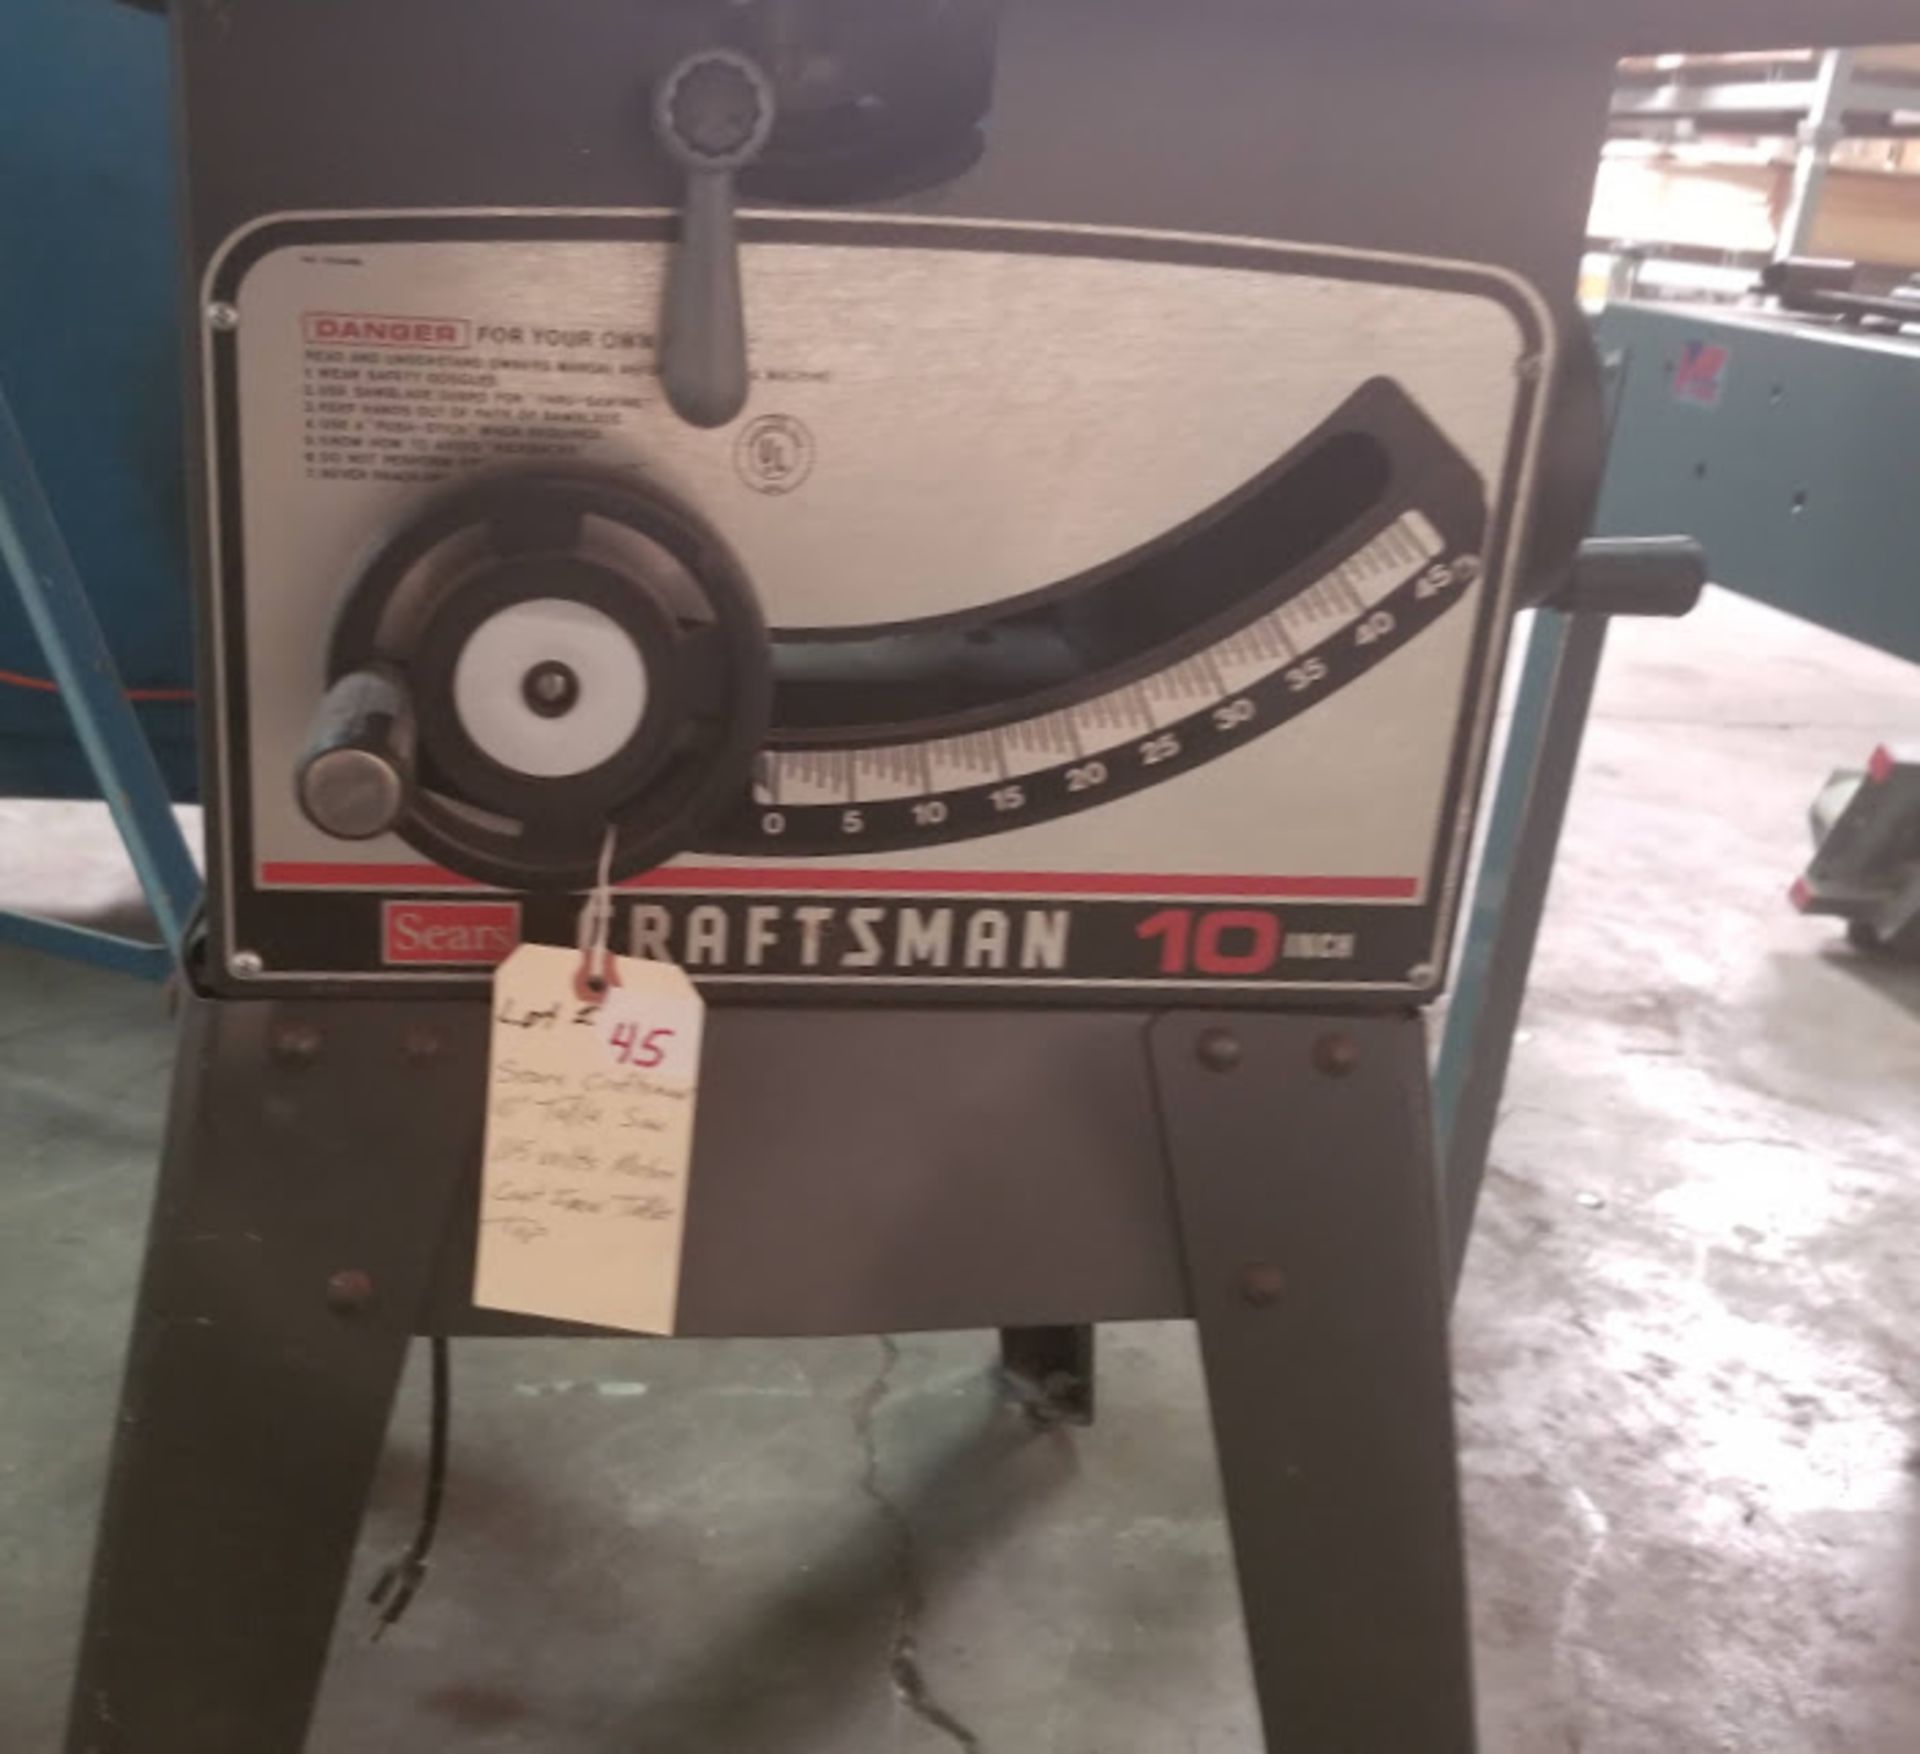 Sears Craftsman 10" Table Saw, 115 Volts Motor Cast Iron Table Top - Image 2 of 5